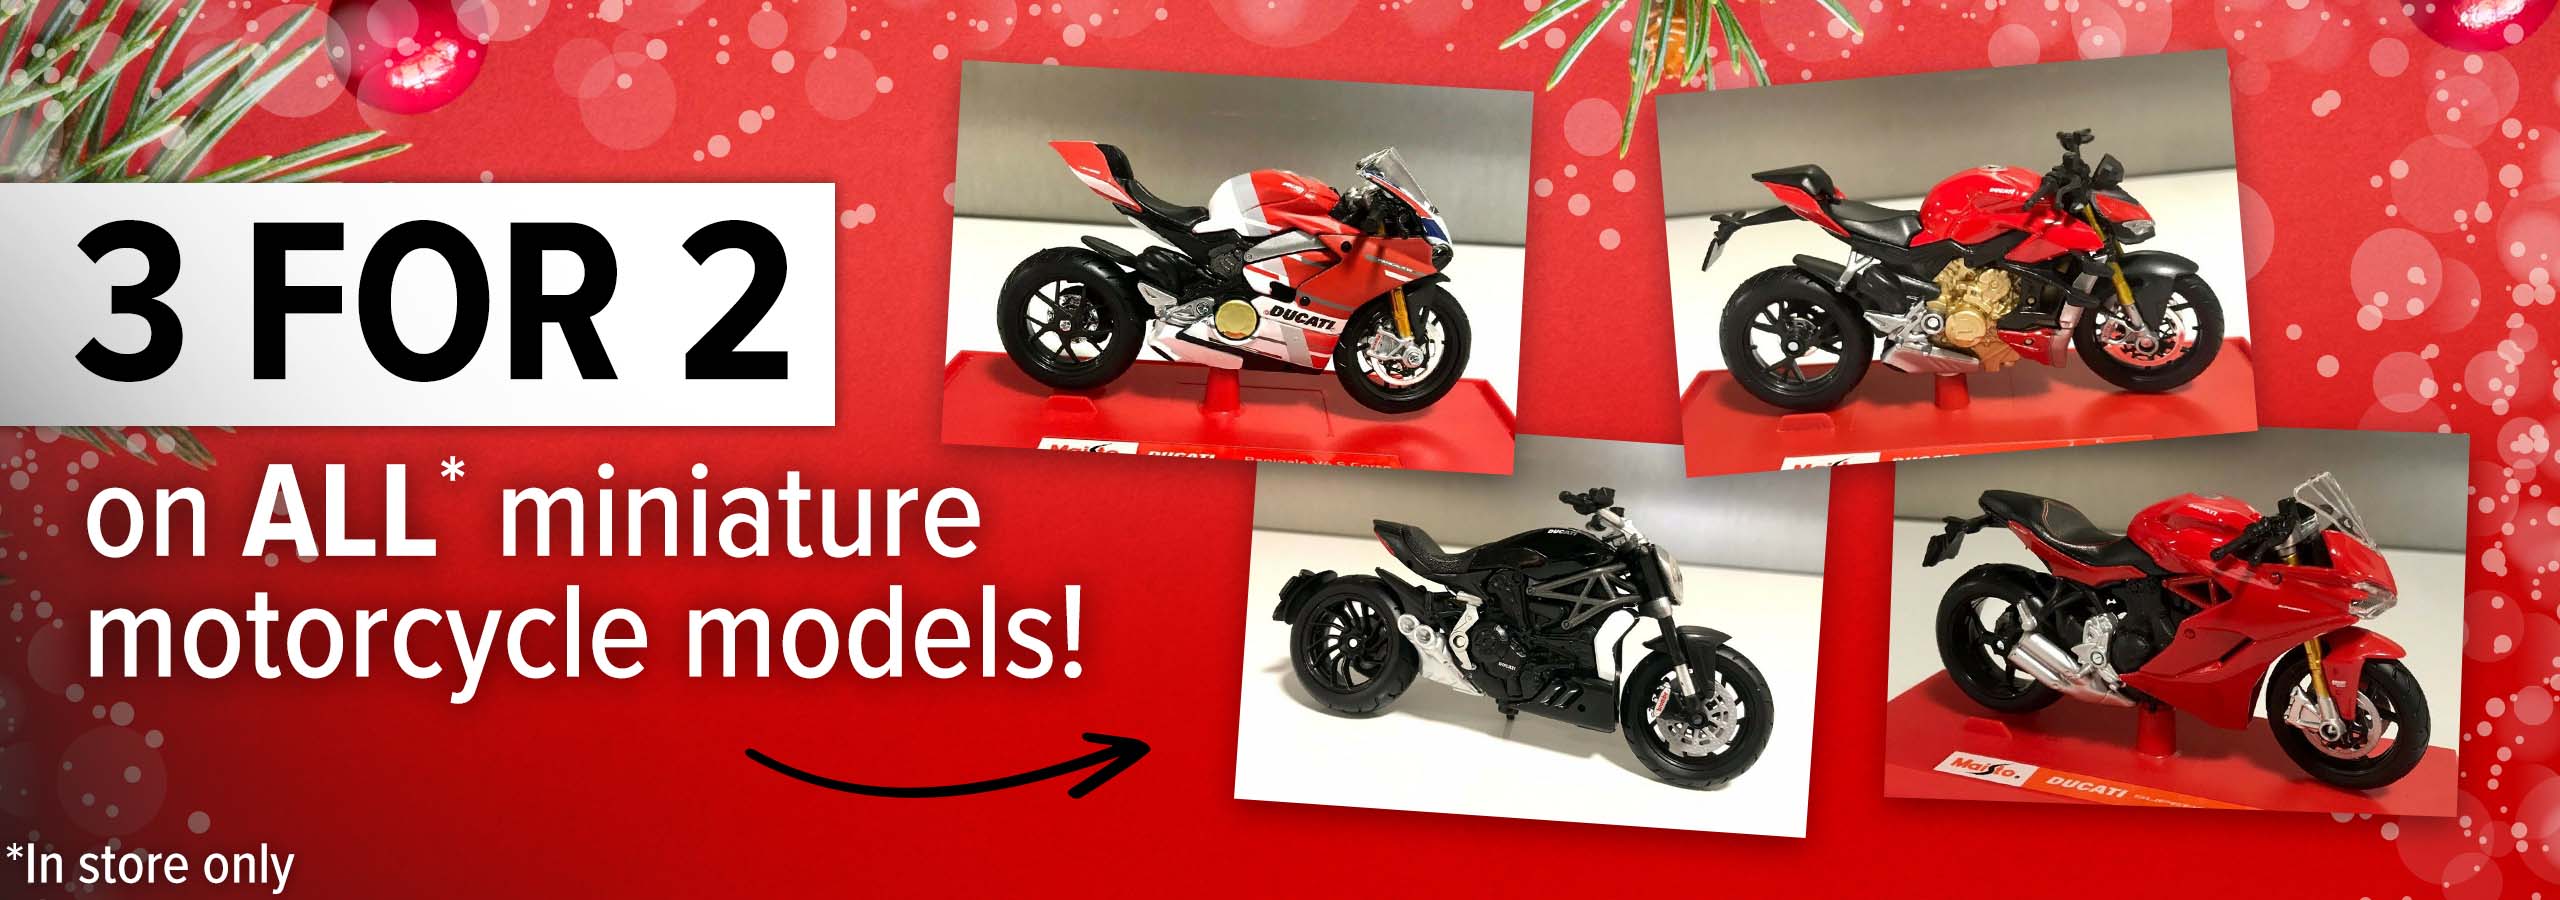 3 for 2 on all miniature motorcycle models only at Laguna Performance Centre